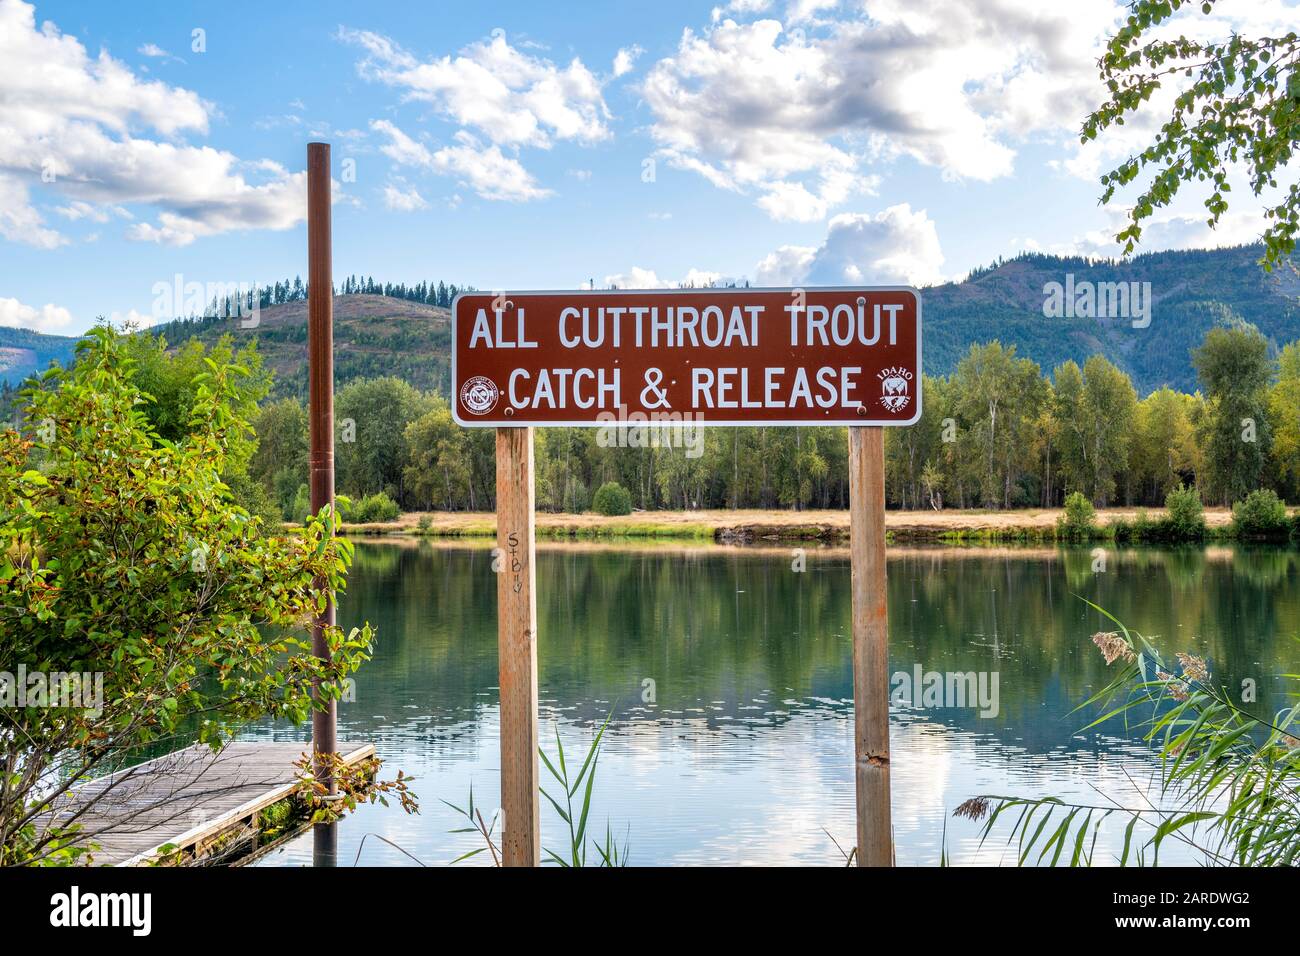 A catch and release sign for Cutthroat Trout along the Coeur d'Alene River near Cataldo, Idaho, part of the Silver Valley. Stock Photo